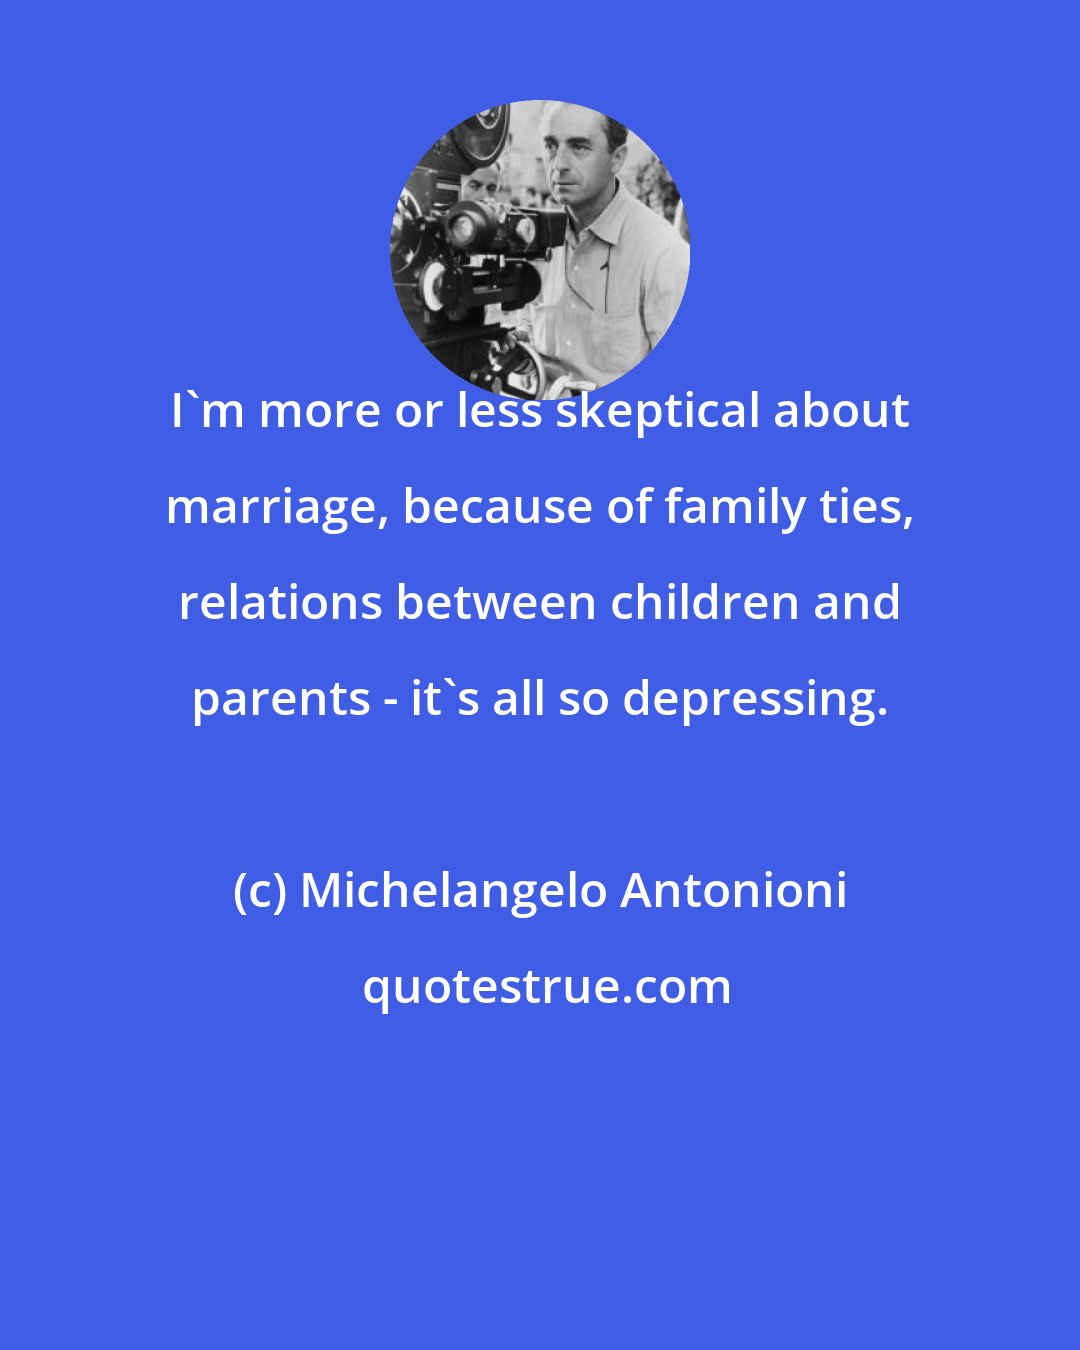 Michelangelo Antonioni: I'm more or less skeptical about marriage, because of family ties, relations between children and parents - it's all so depressing.